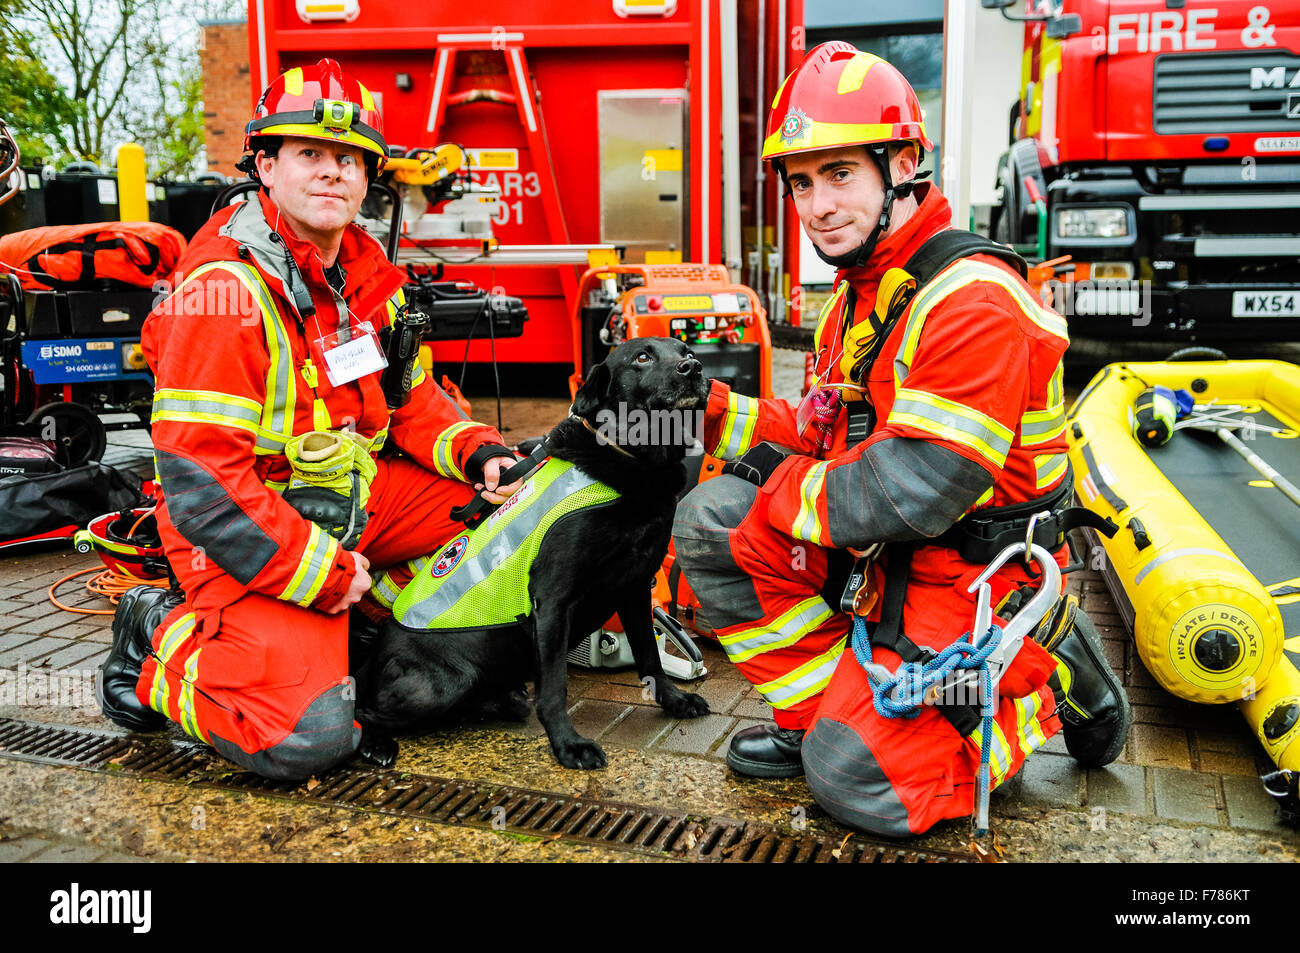 Northern Ireland. 26th November, 2015. Officers from the Northern Ireland Fire and Rescue Service Enhanced Capability Unit, trained in rescuing people from hazardous situations such as dangerous buildings, heights, and water, with 'Sam' one of their rescue dogs. Credit:  Stephen Barnes/Alamy Live News Stock Photo